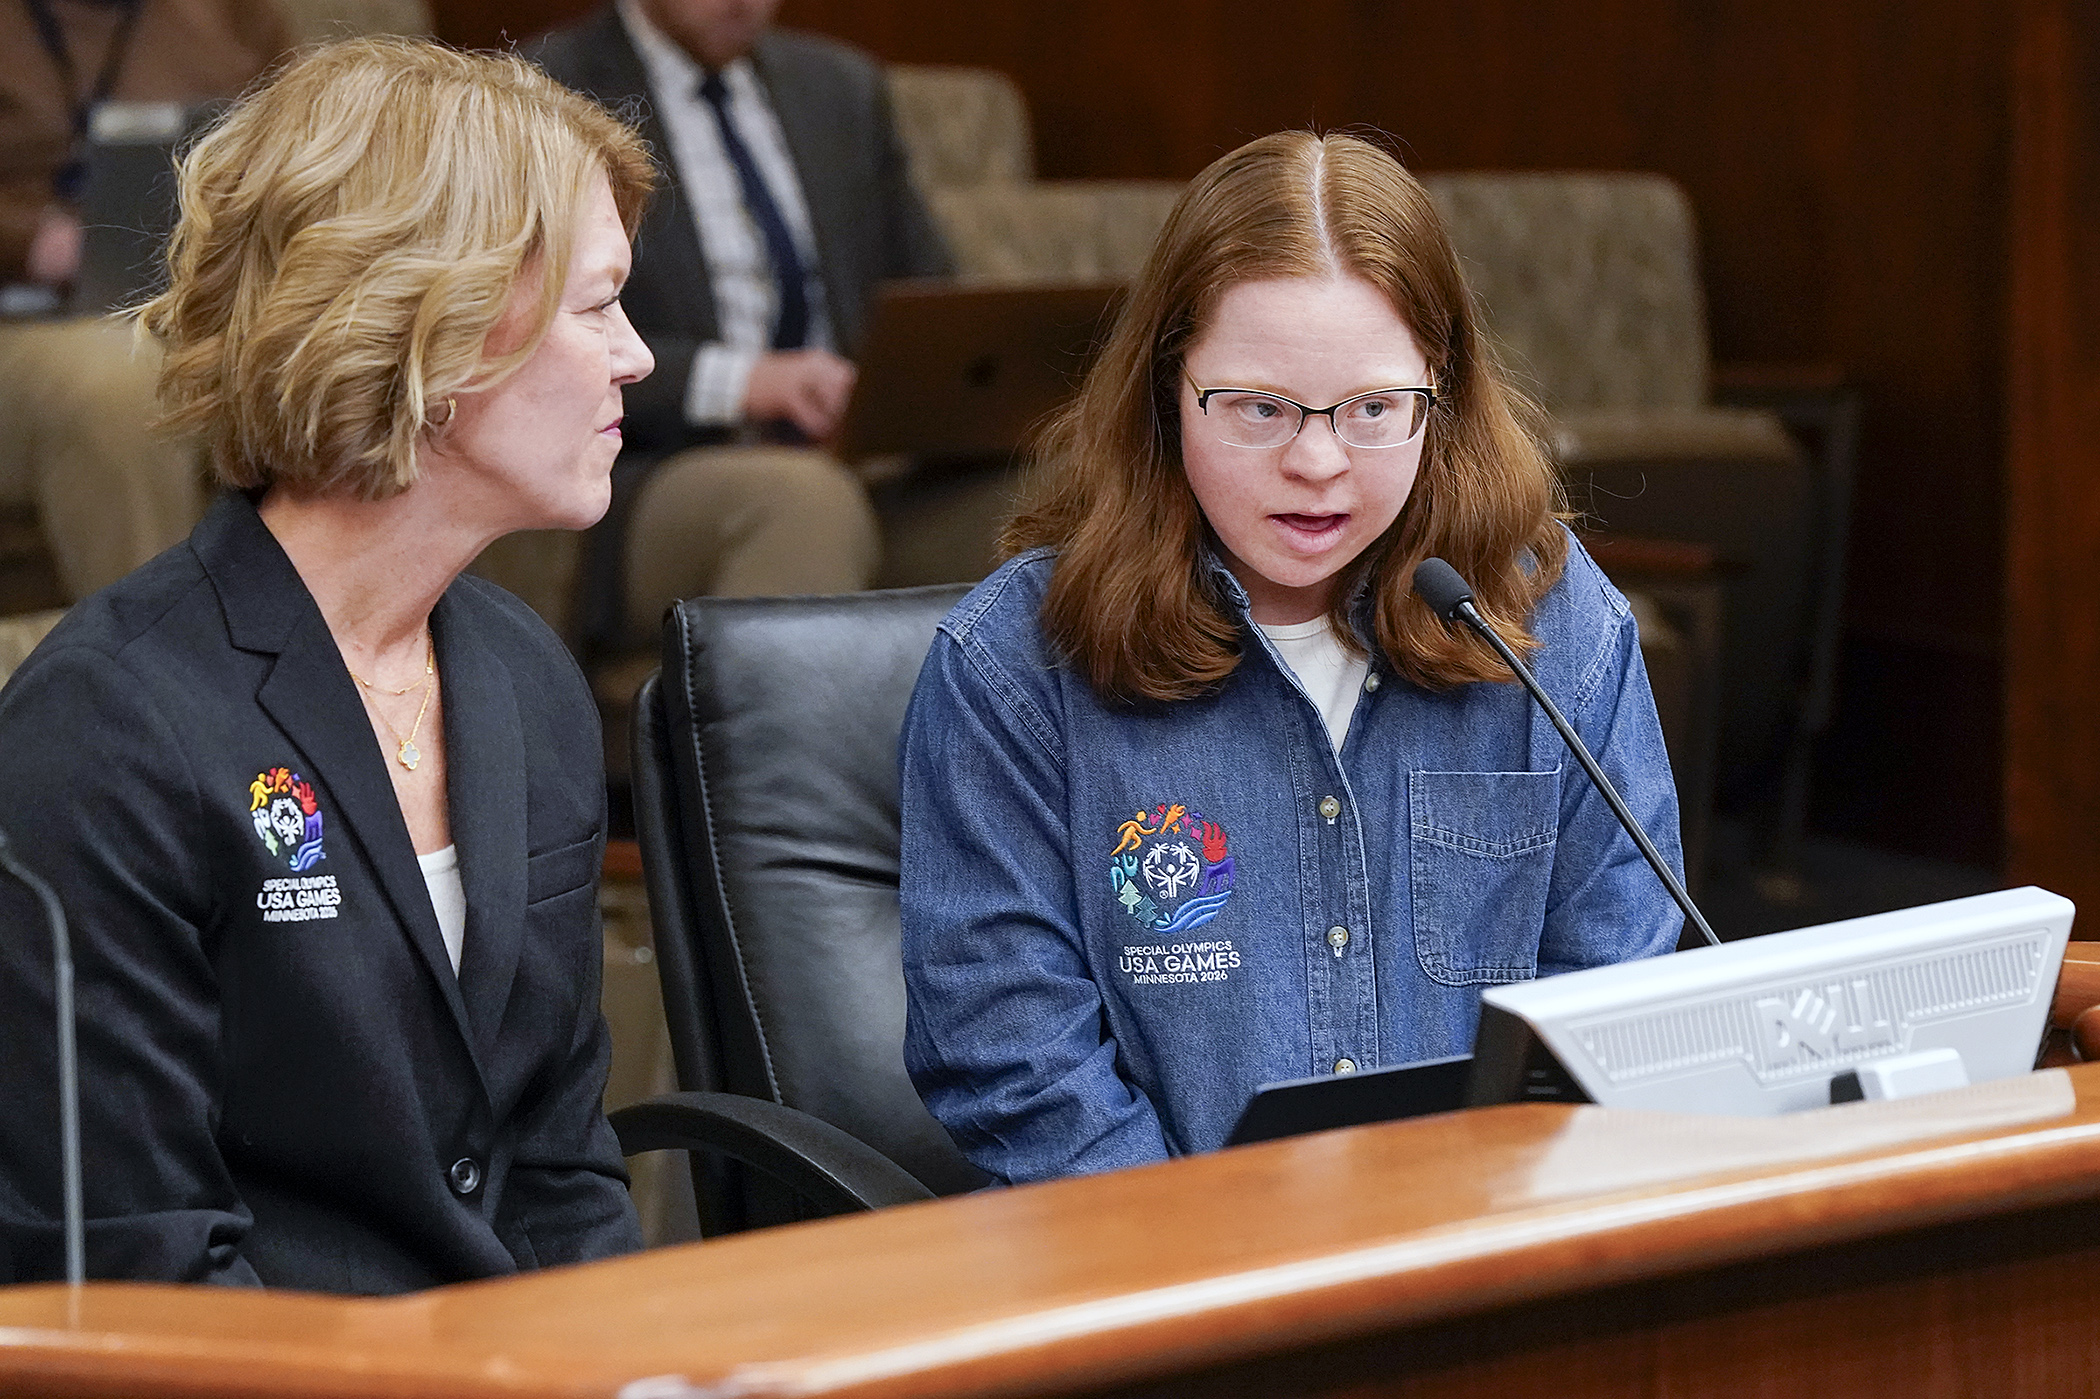 Special Olympics athlete Abby Hirsch testifies before the House economic development panel March 27 in support of HF4123. Christy Sovereign, president and CEO of the 2026 Special Olympics USA Games, left, also testified. (Photo by Michele Jokinen)